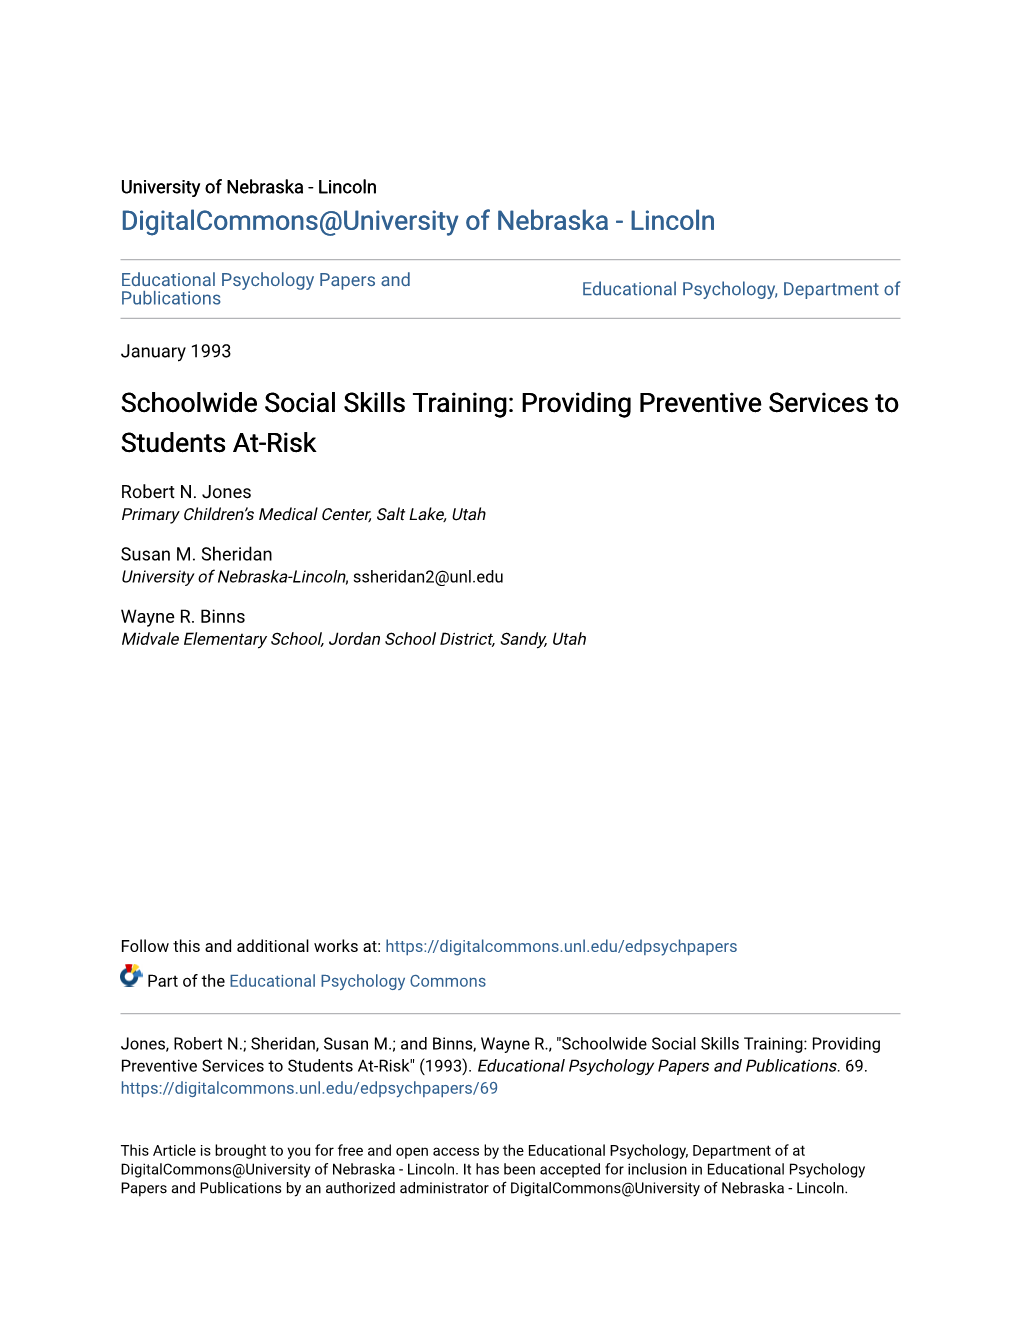 Schoolwide Social Skills Training: Providing Preventive Services to Students At-Risk